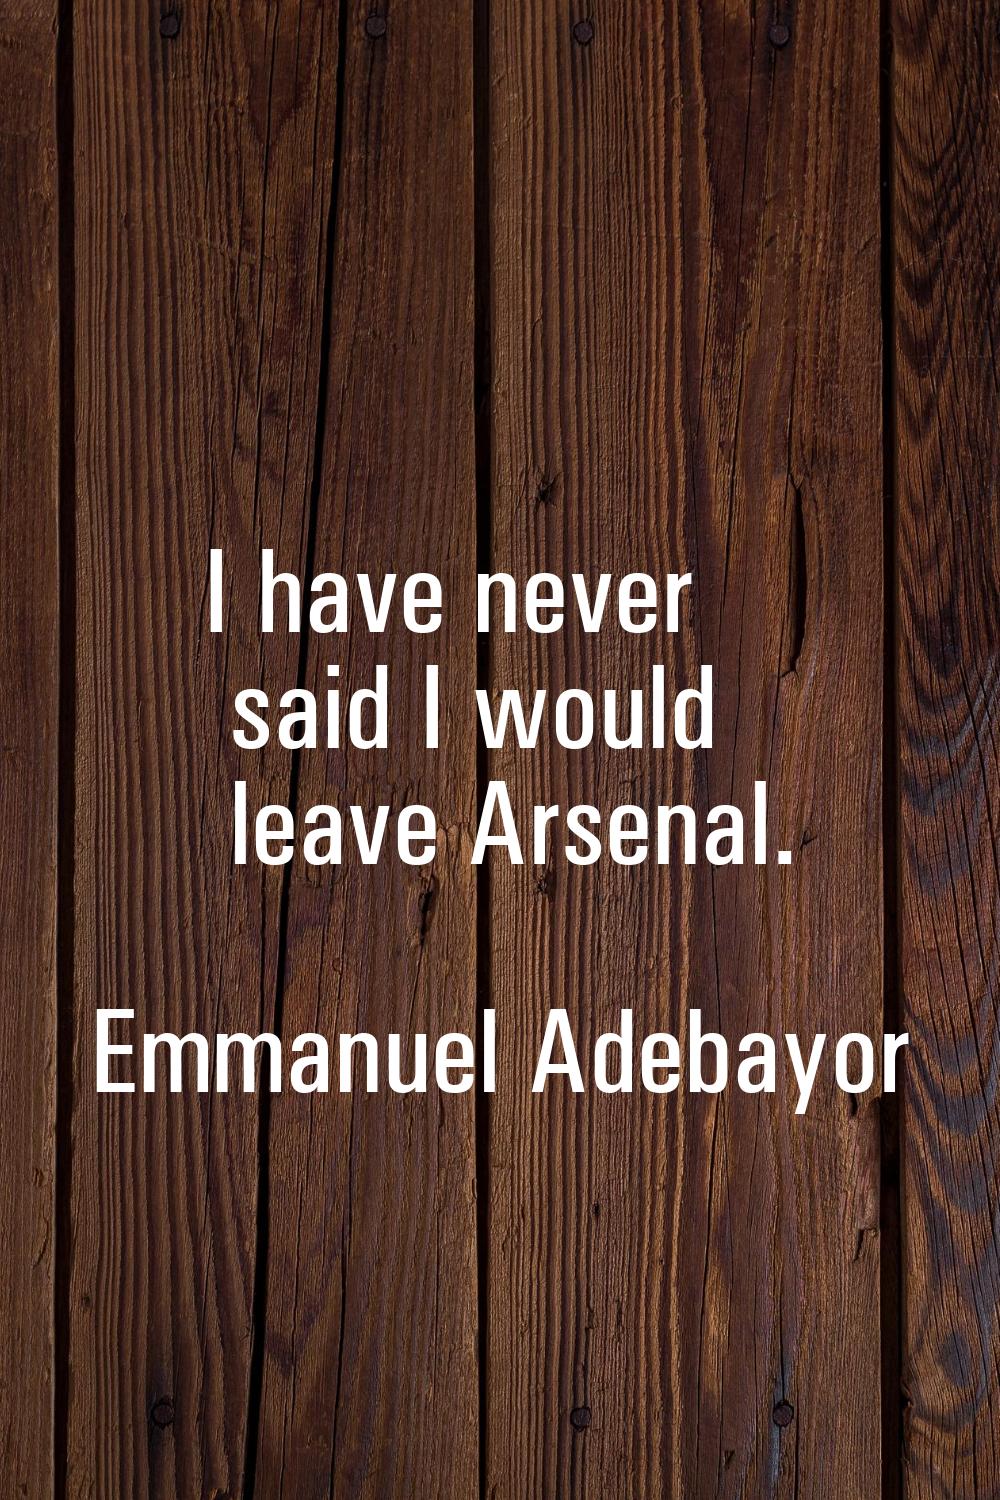 I have never said I would leave Arsenal.